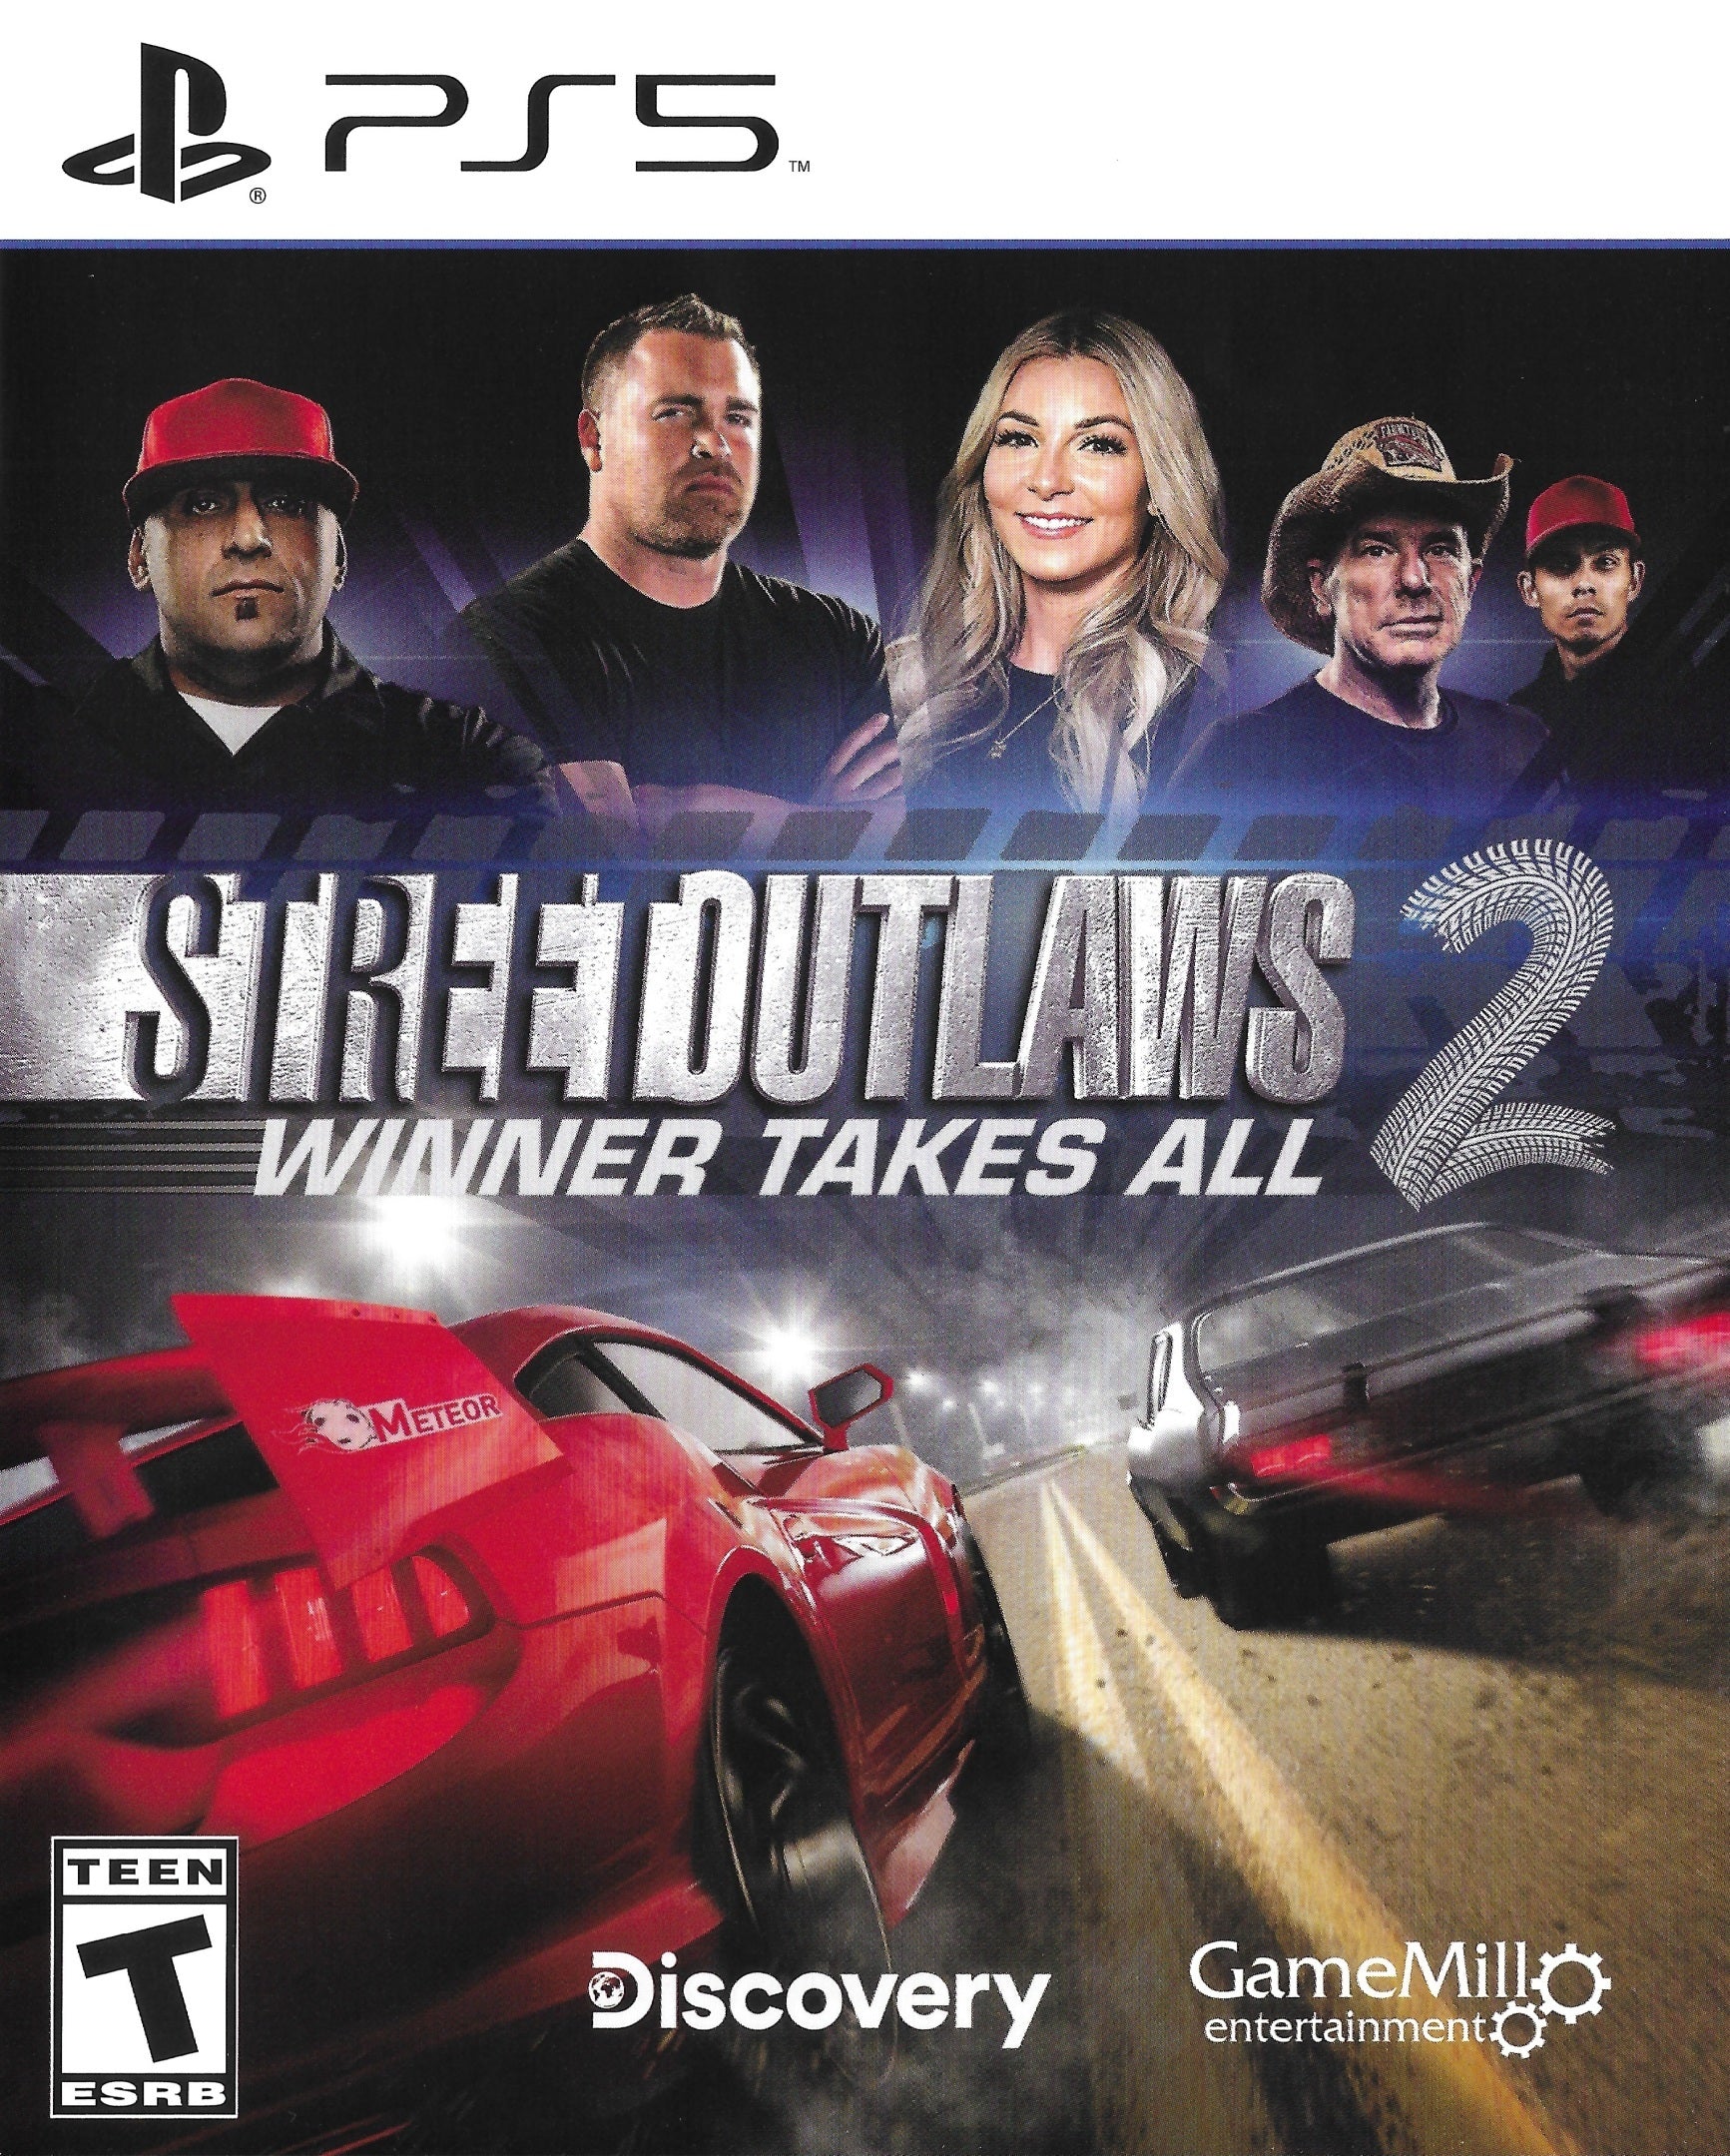 Street Outlaws 2: Winner Takes All - (PS5) PlayStation 5 [UNBOXING] Video Games GameMill Entertainment   